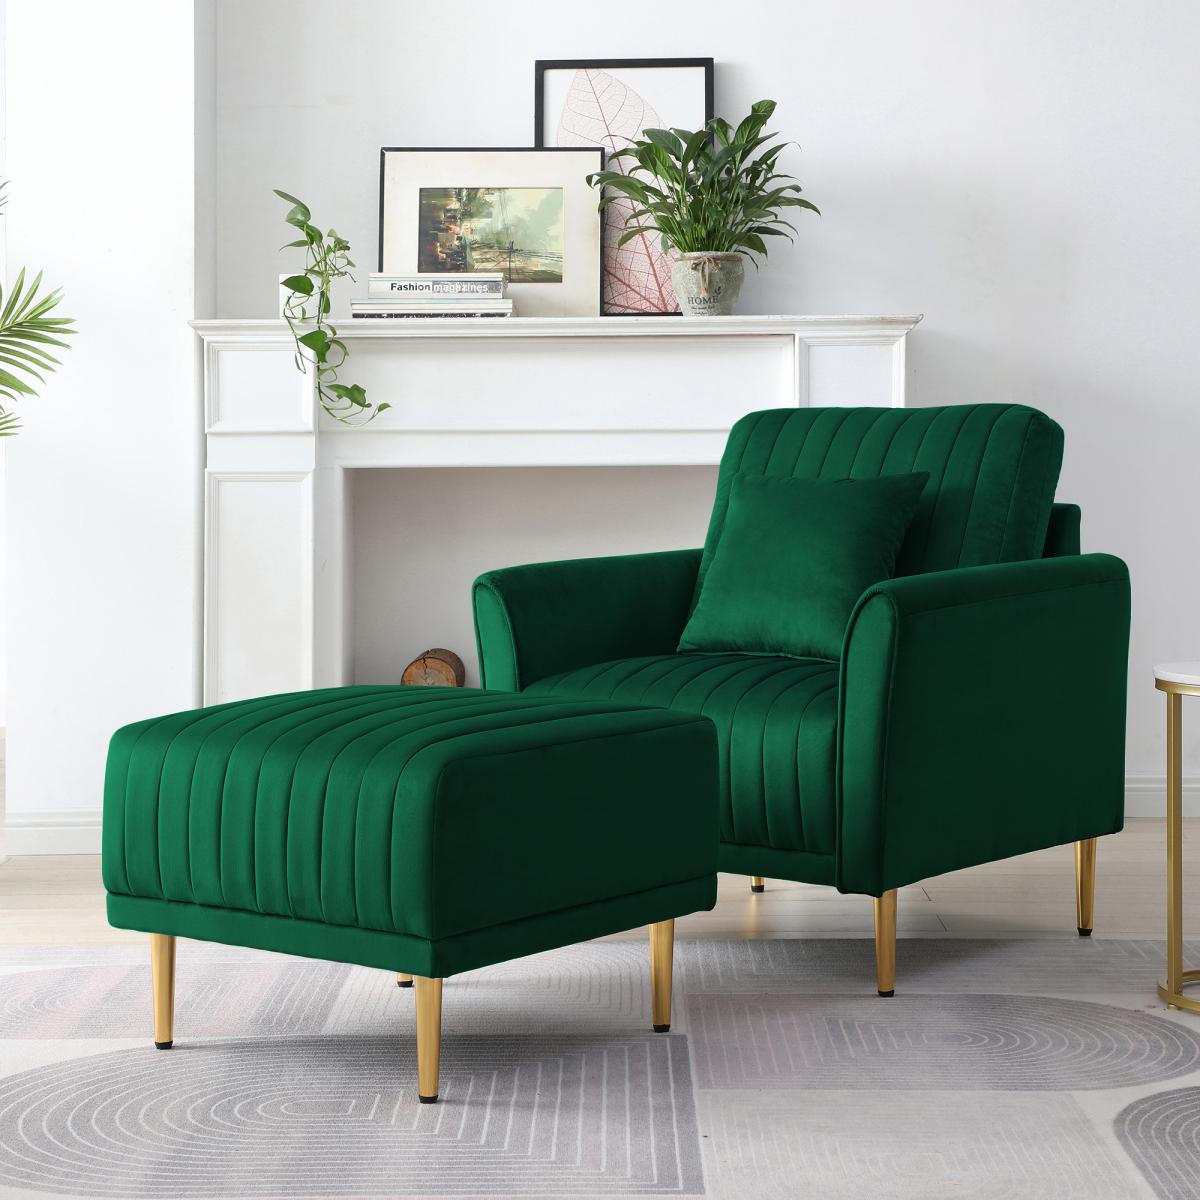 Modern Accent Chair Roll Arm Fabric Chairs, Contemporary Leisure Side Chair, Armchair for Living Room or Bedroom with Metal Legs, Upholstered Single Sofa Club Chair Green